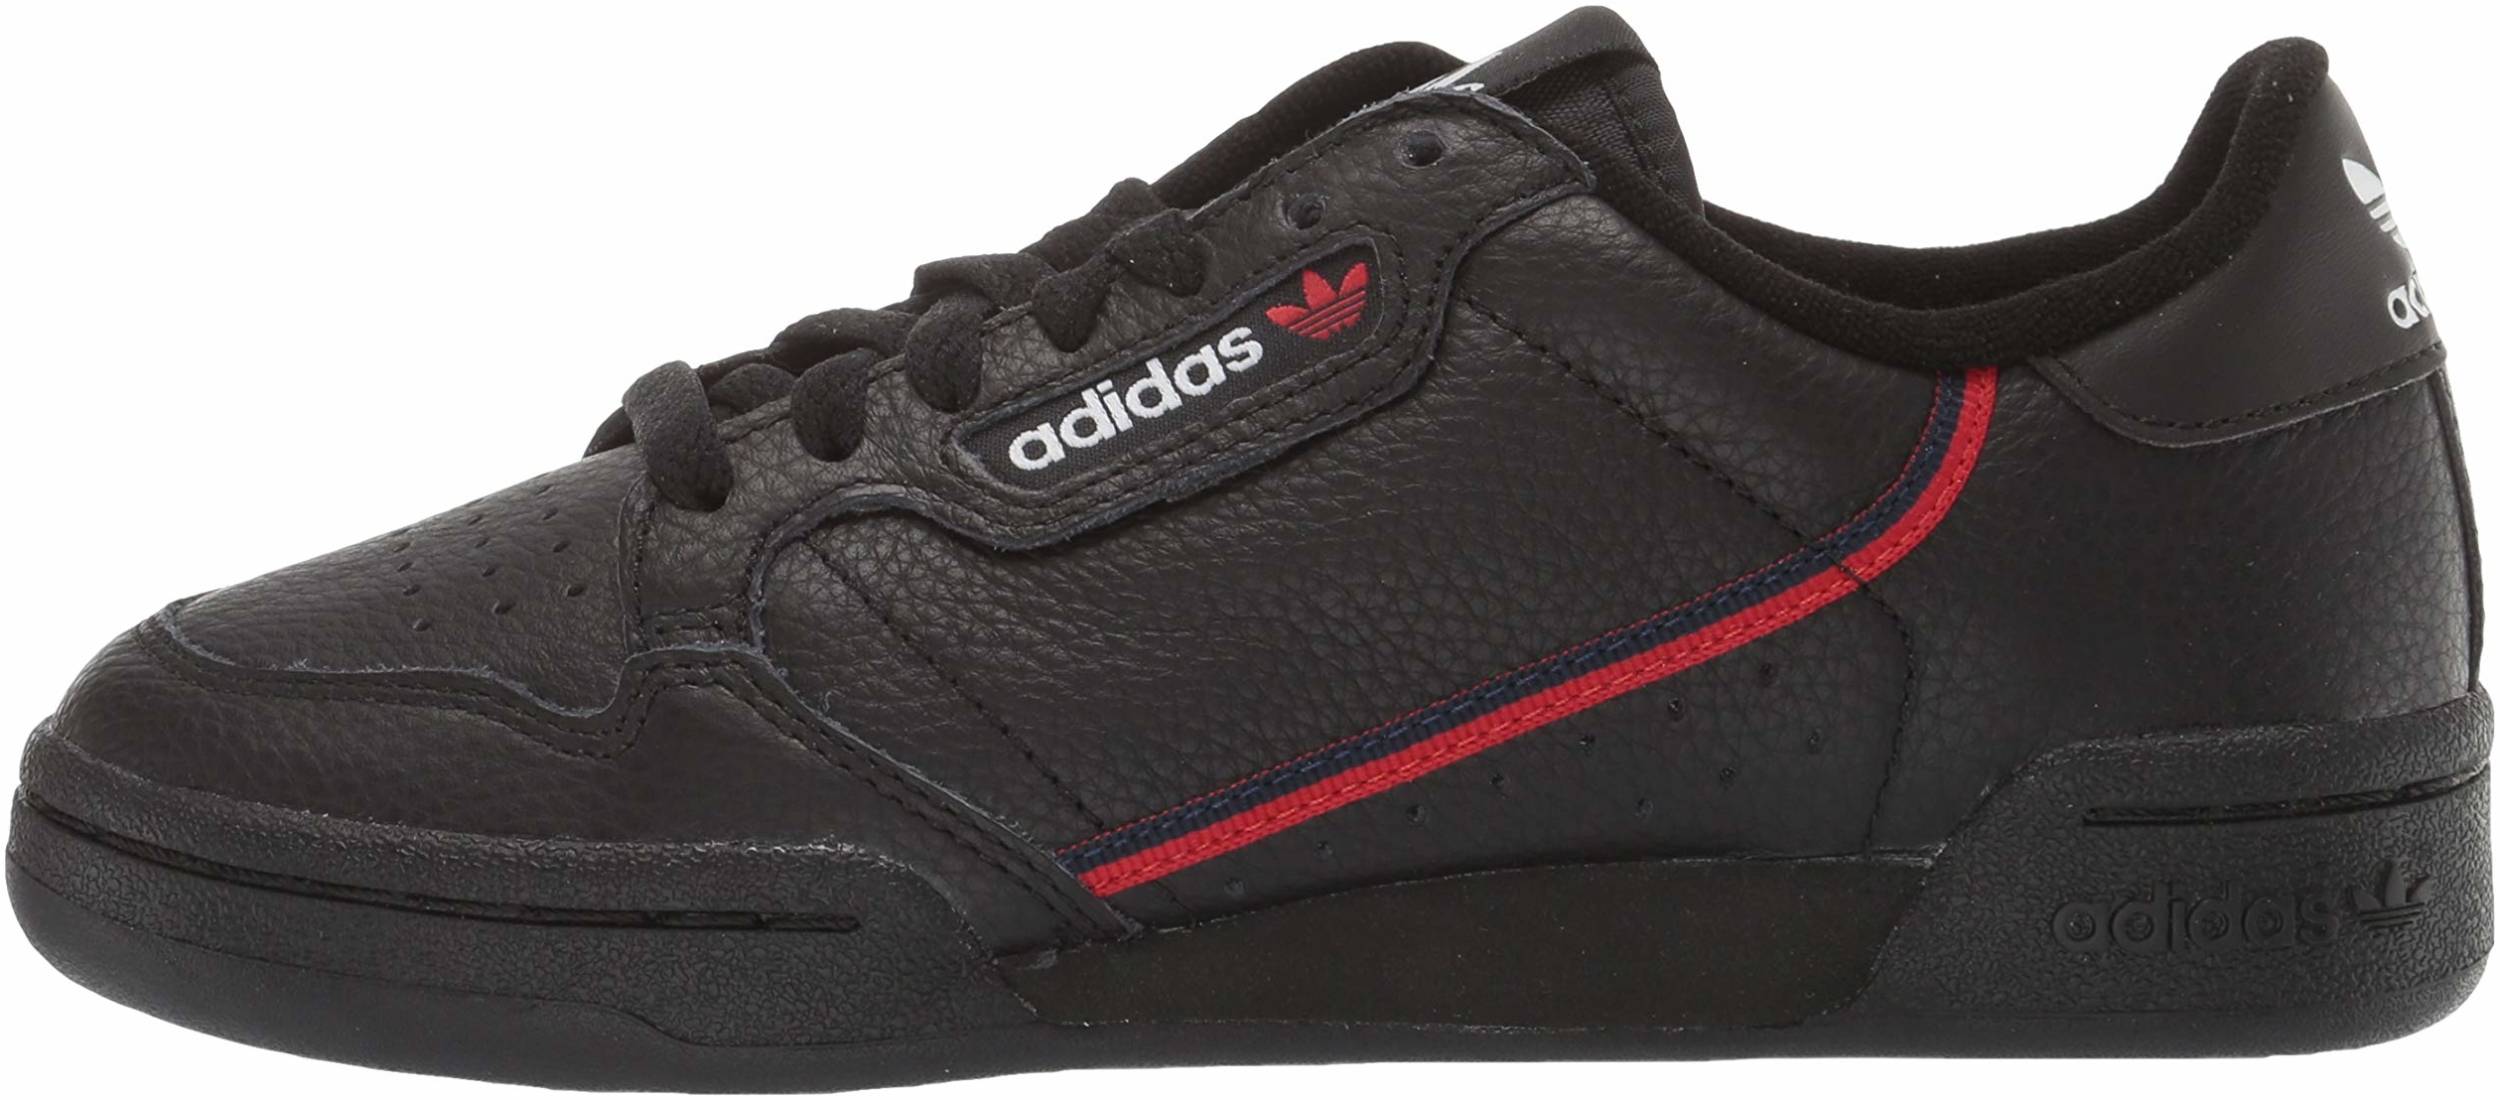 metálico Excluir Manual Adidas Continental 80 Review, adidas jb01 deck shoe rack for sale on ebay  cars | Facts, Infrastructure-intelligenceShops, Comparison